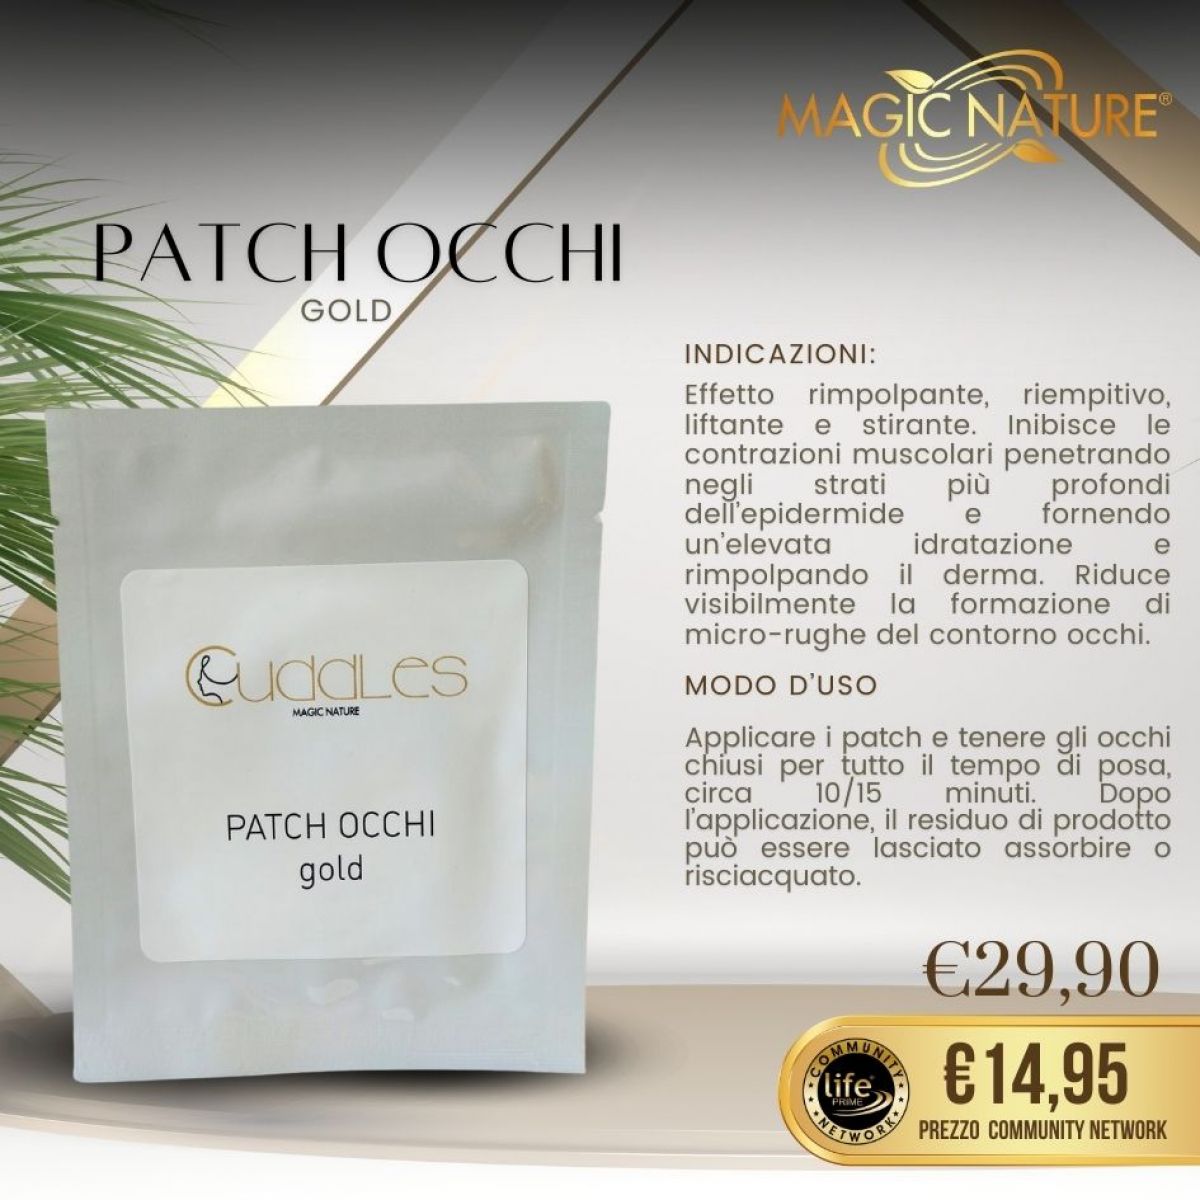 PATCH OCCHI GOLD